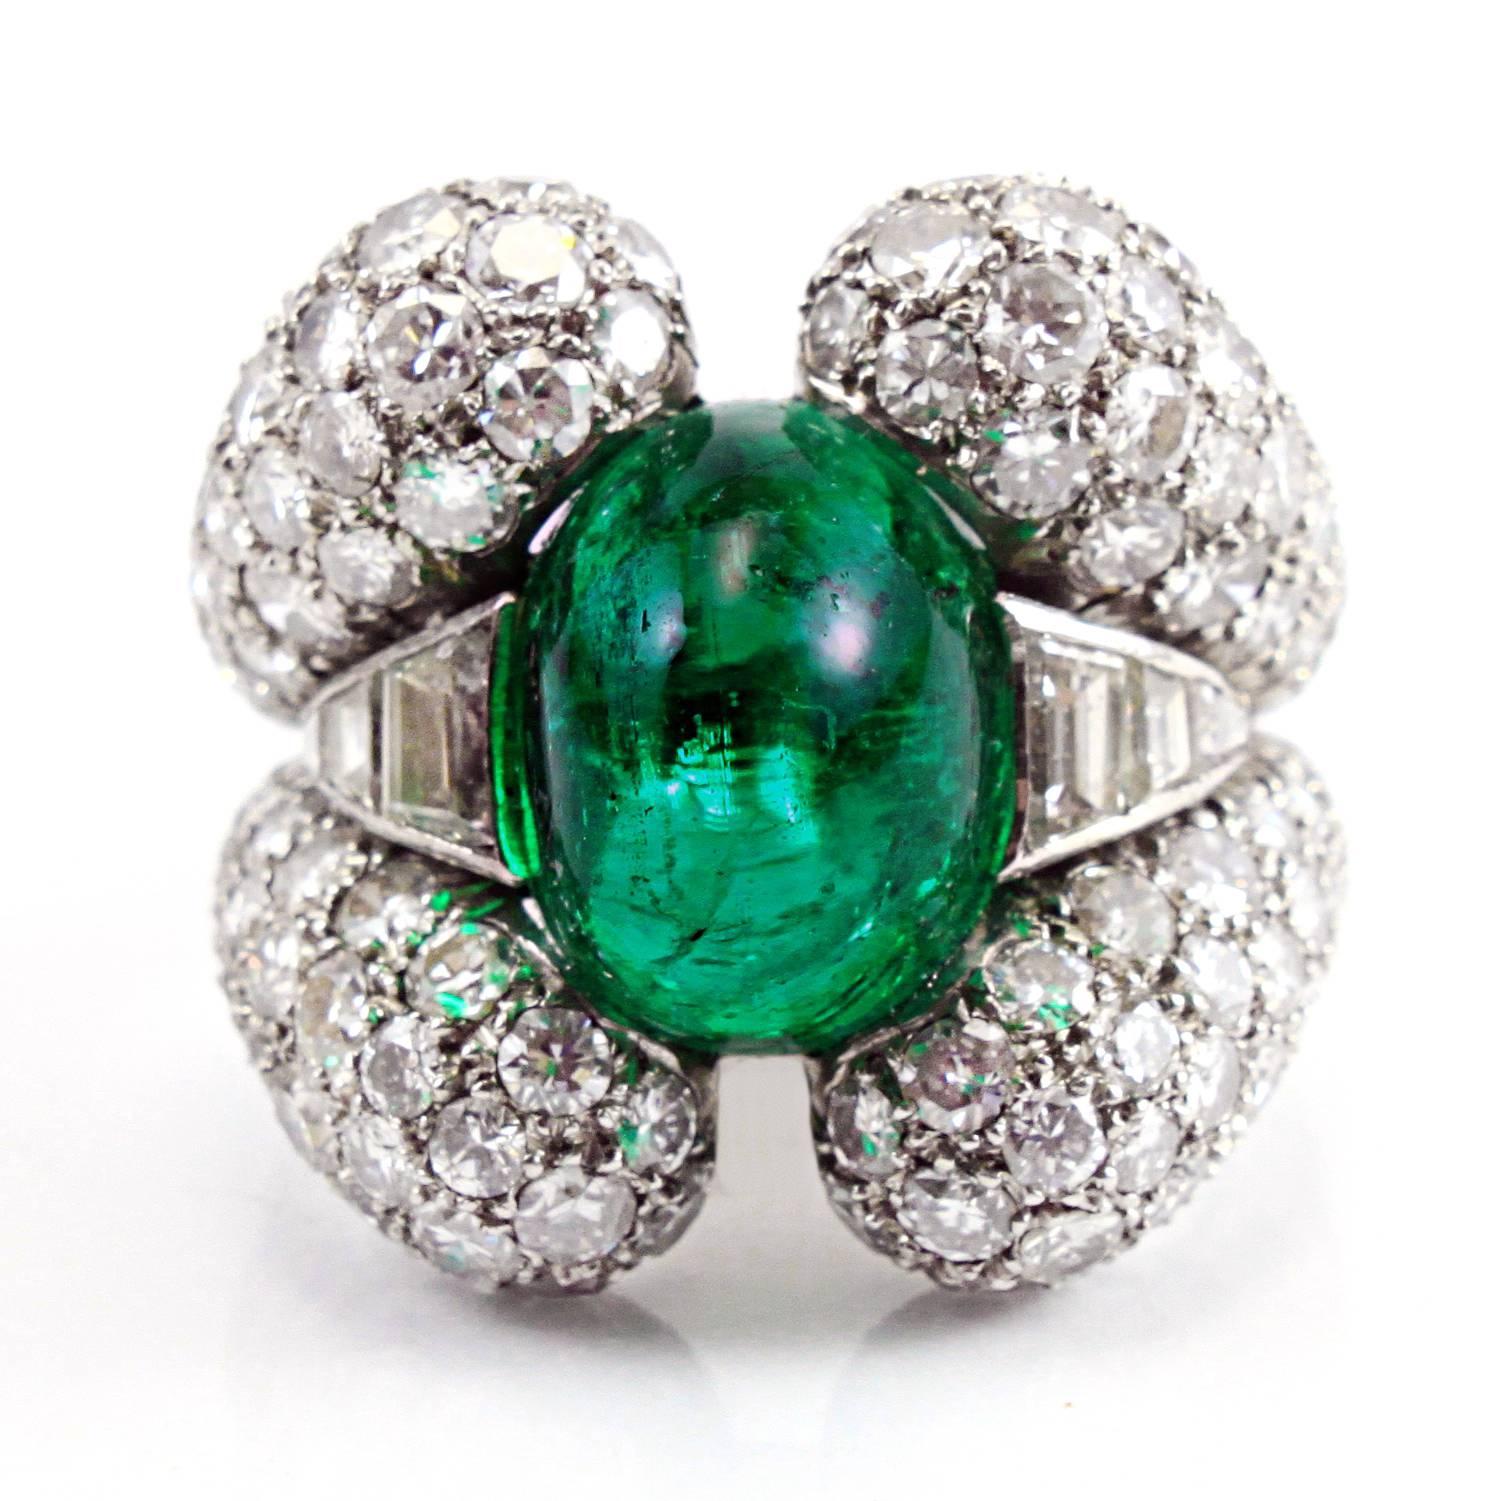 A very chic emerald and diamond ring from the 1940s, centring an important old-mine Colombian emerald of ca. 9 carats and ca. 6 carats of diamonds in four clusters around it. The ring is made in platinum and is most probably French.
